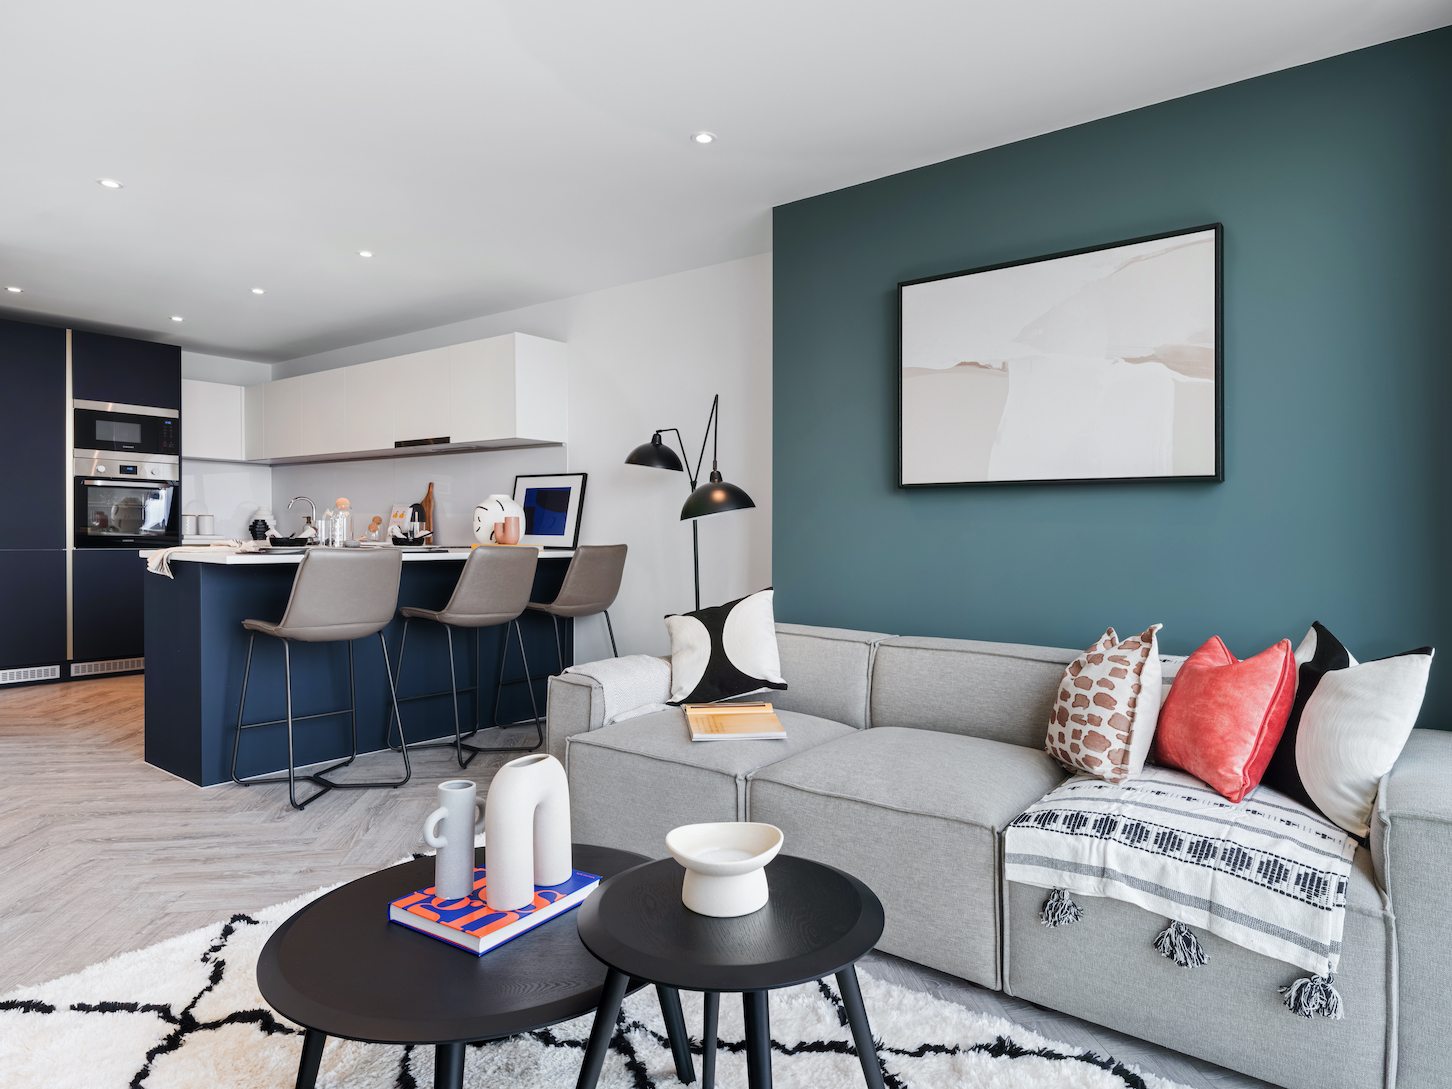 Apartments to Rent by Cortland in Cortland at Colliers Yard, Salford, M3, living kitchen area